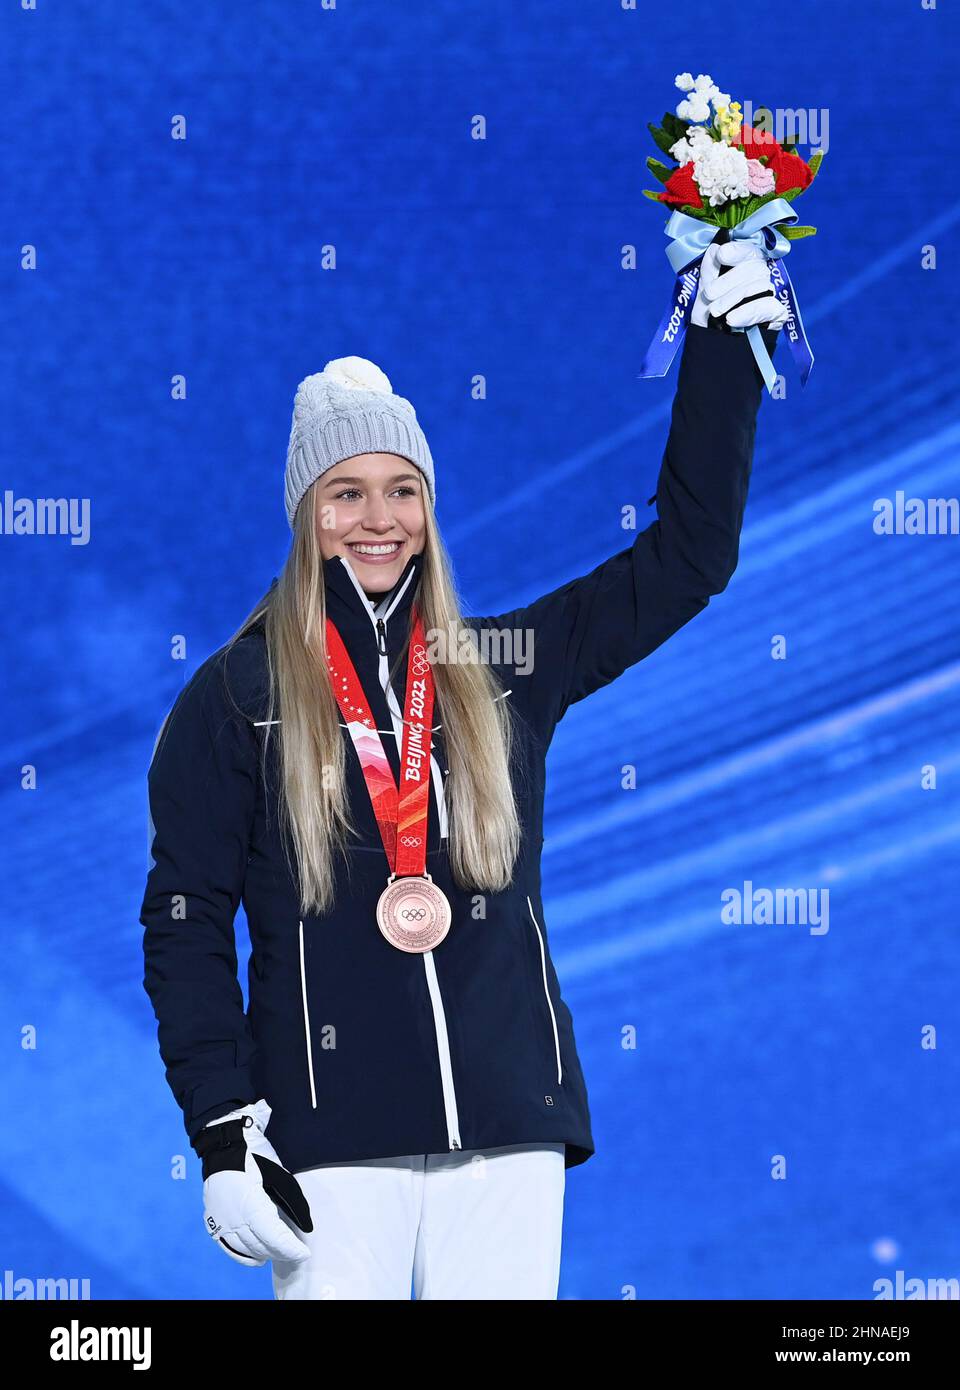 Zhangjiakou, China's Hebei Province. 15th Feb, 2022. Bronze medalist Kelly Sildaru of Estonia poses during the awarding ceremony of freestyle skiing women's freeski slopestyle at Zhangjiakou Medals Plaza of the Winter Olympics in Zhangjiakou, north China's Hebei Province, Feb. 15, 2022. Credit: Hu Huhu/Xinhua/Alamy Live News Stock Photo